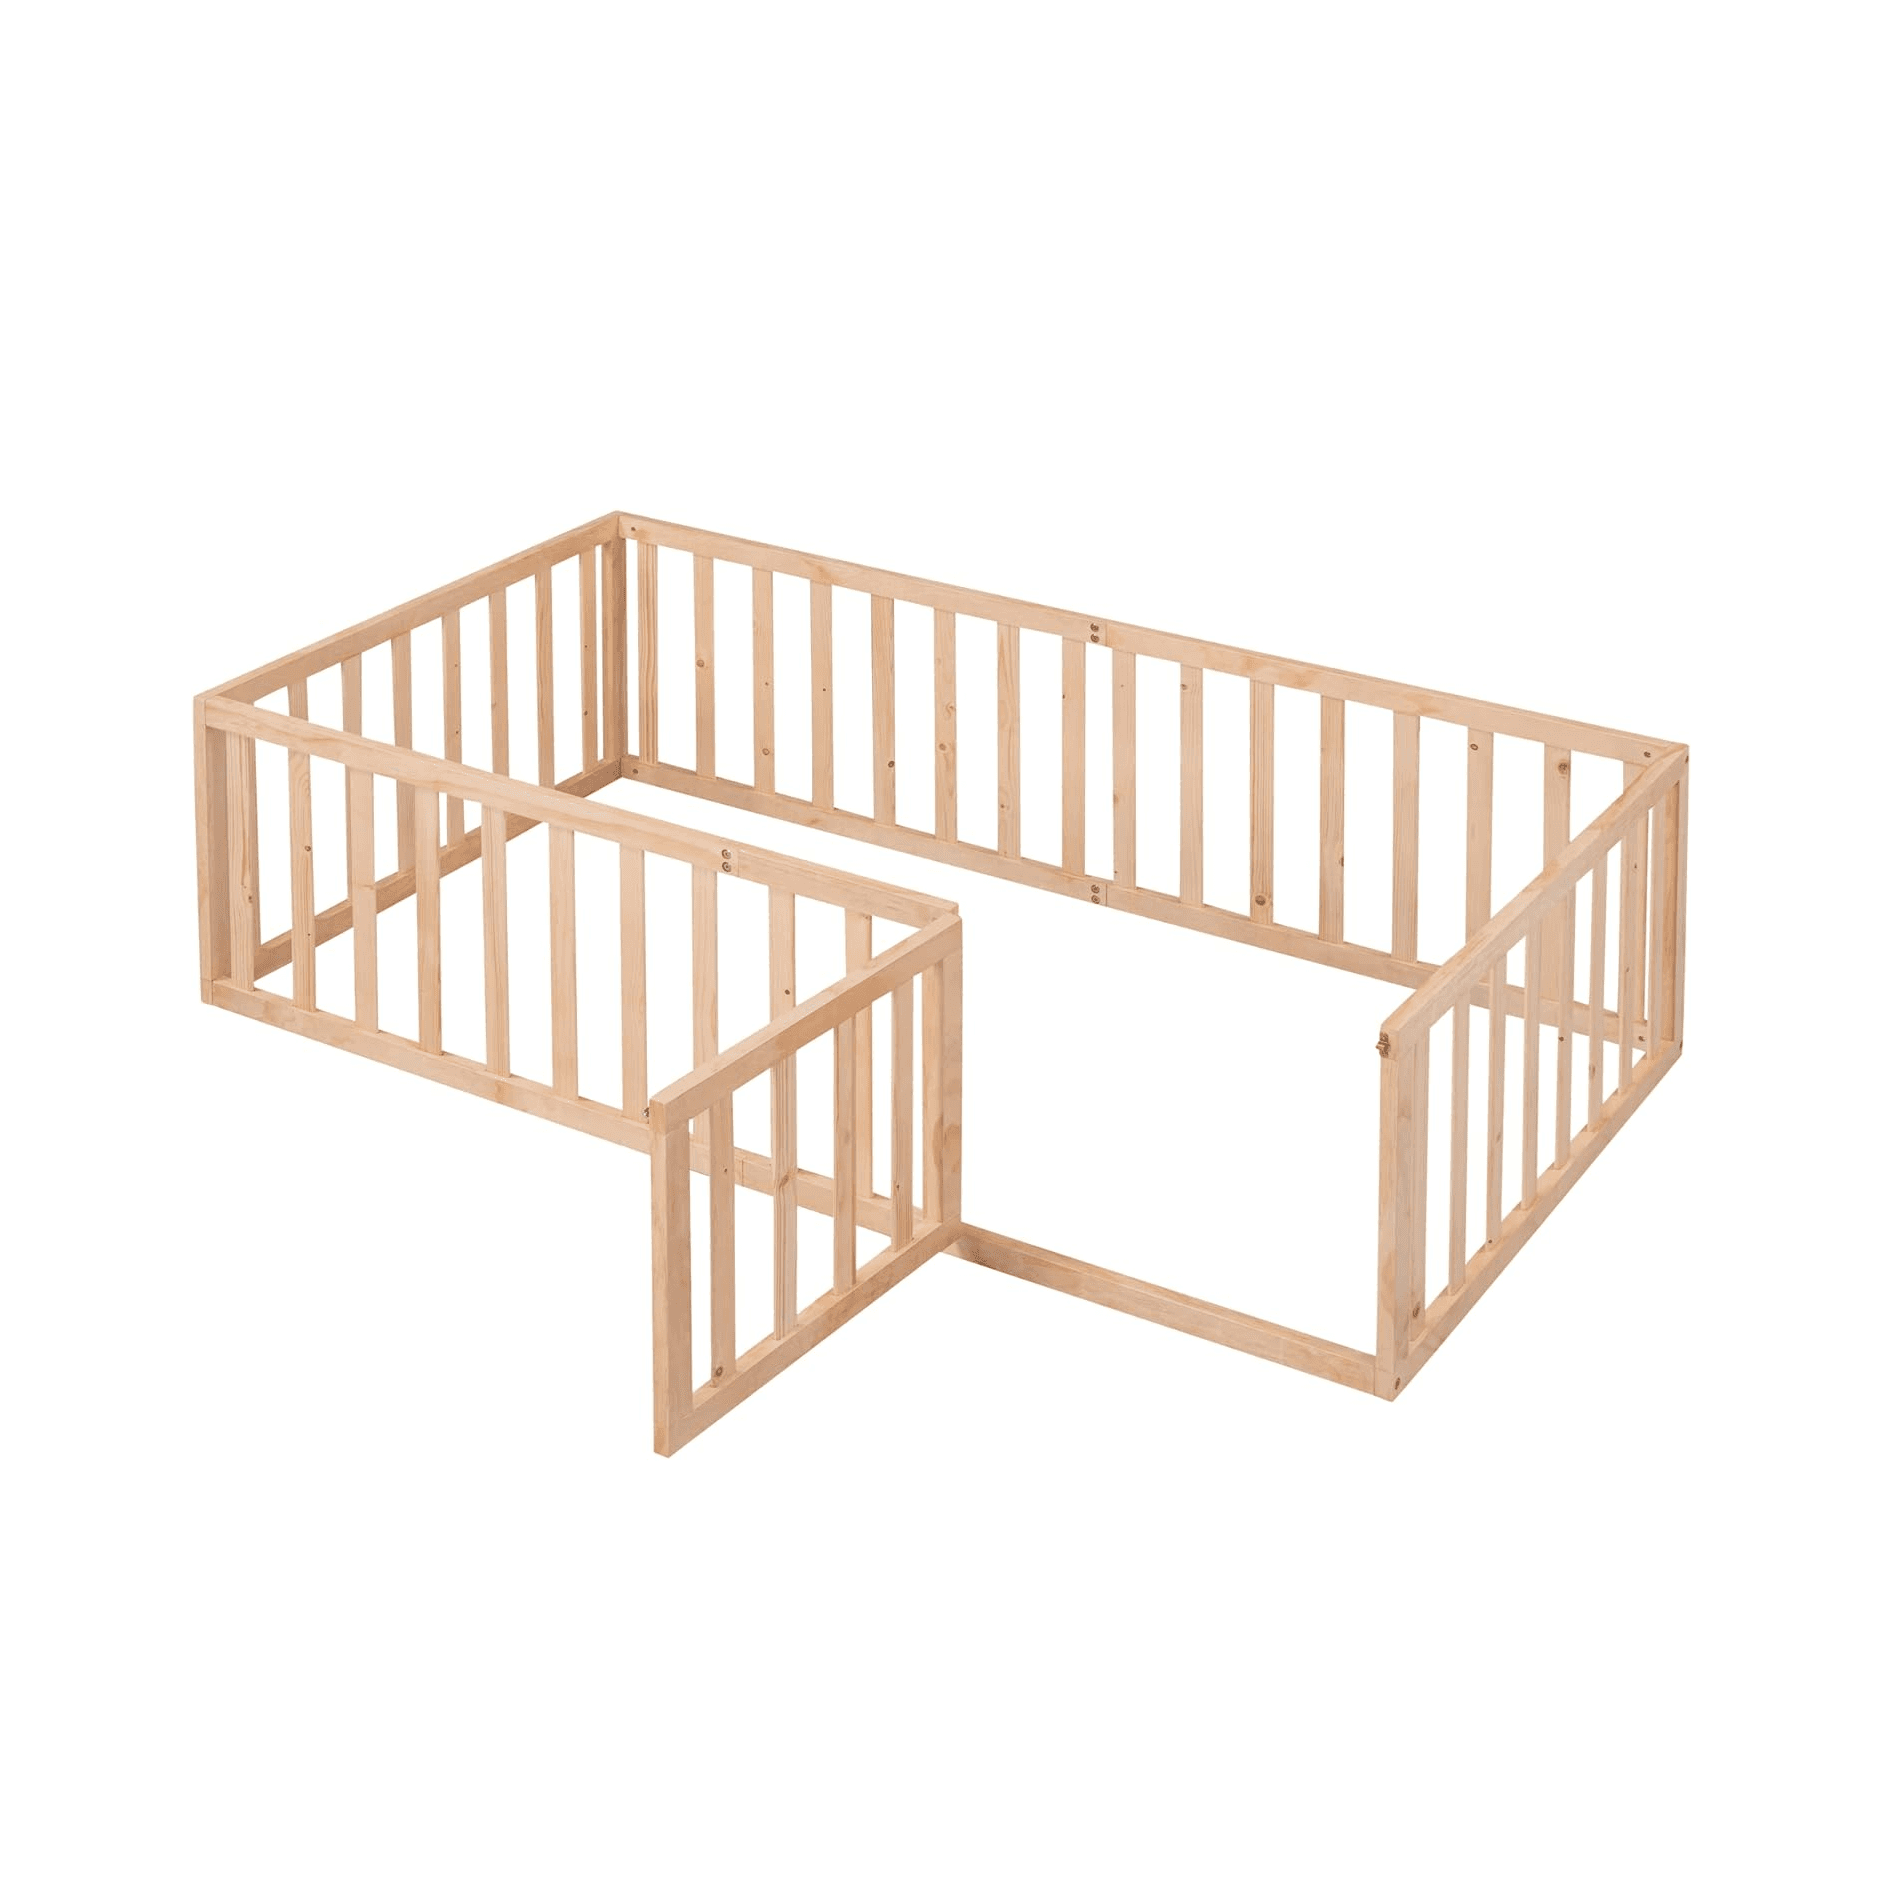 Montessori Bellemave Twin Size Floor Bed Frame With Fence Railings and Door Natural